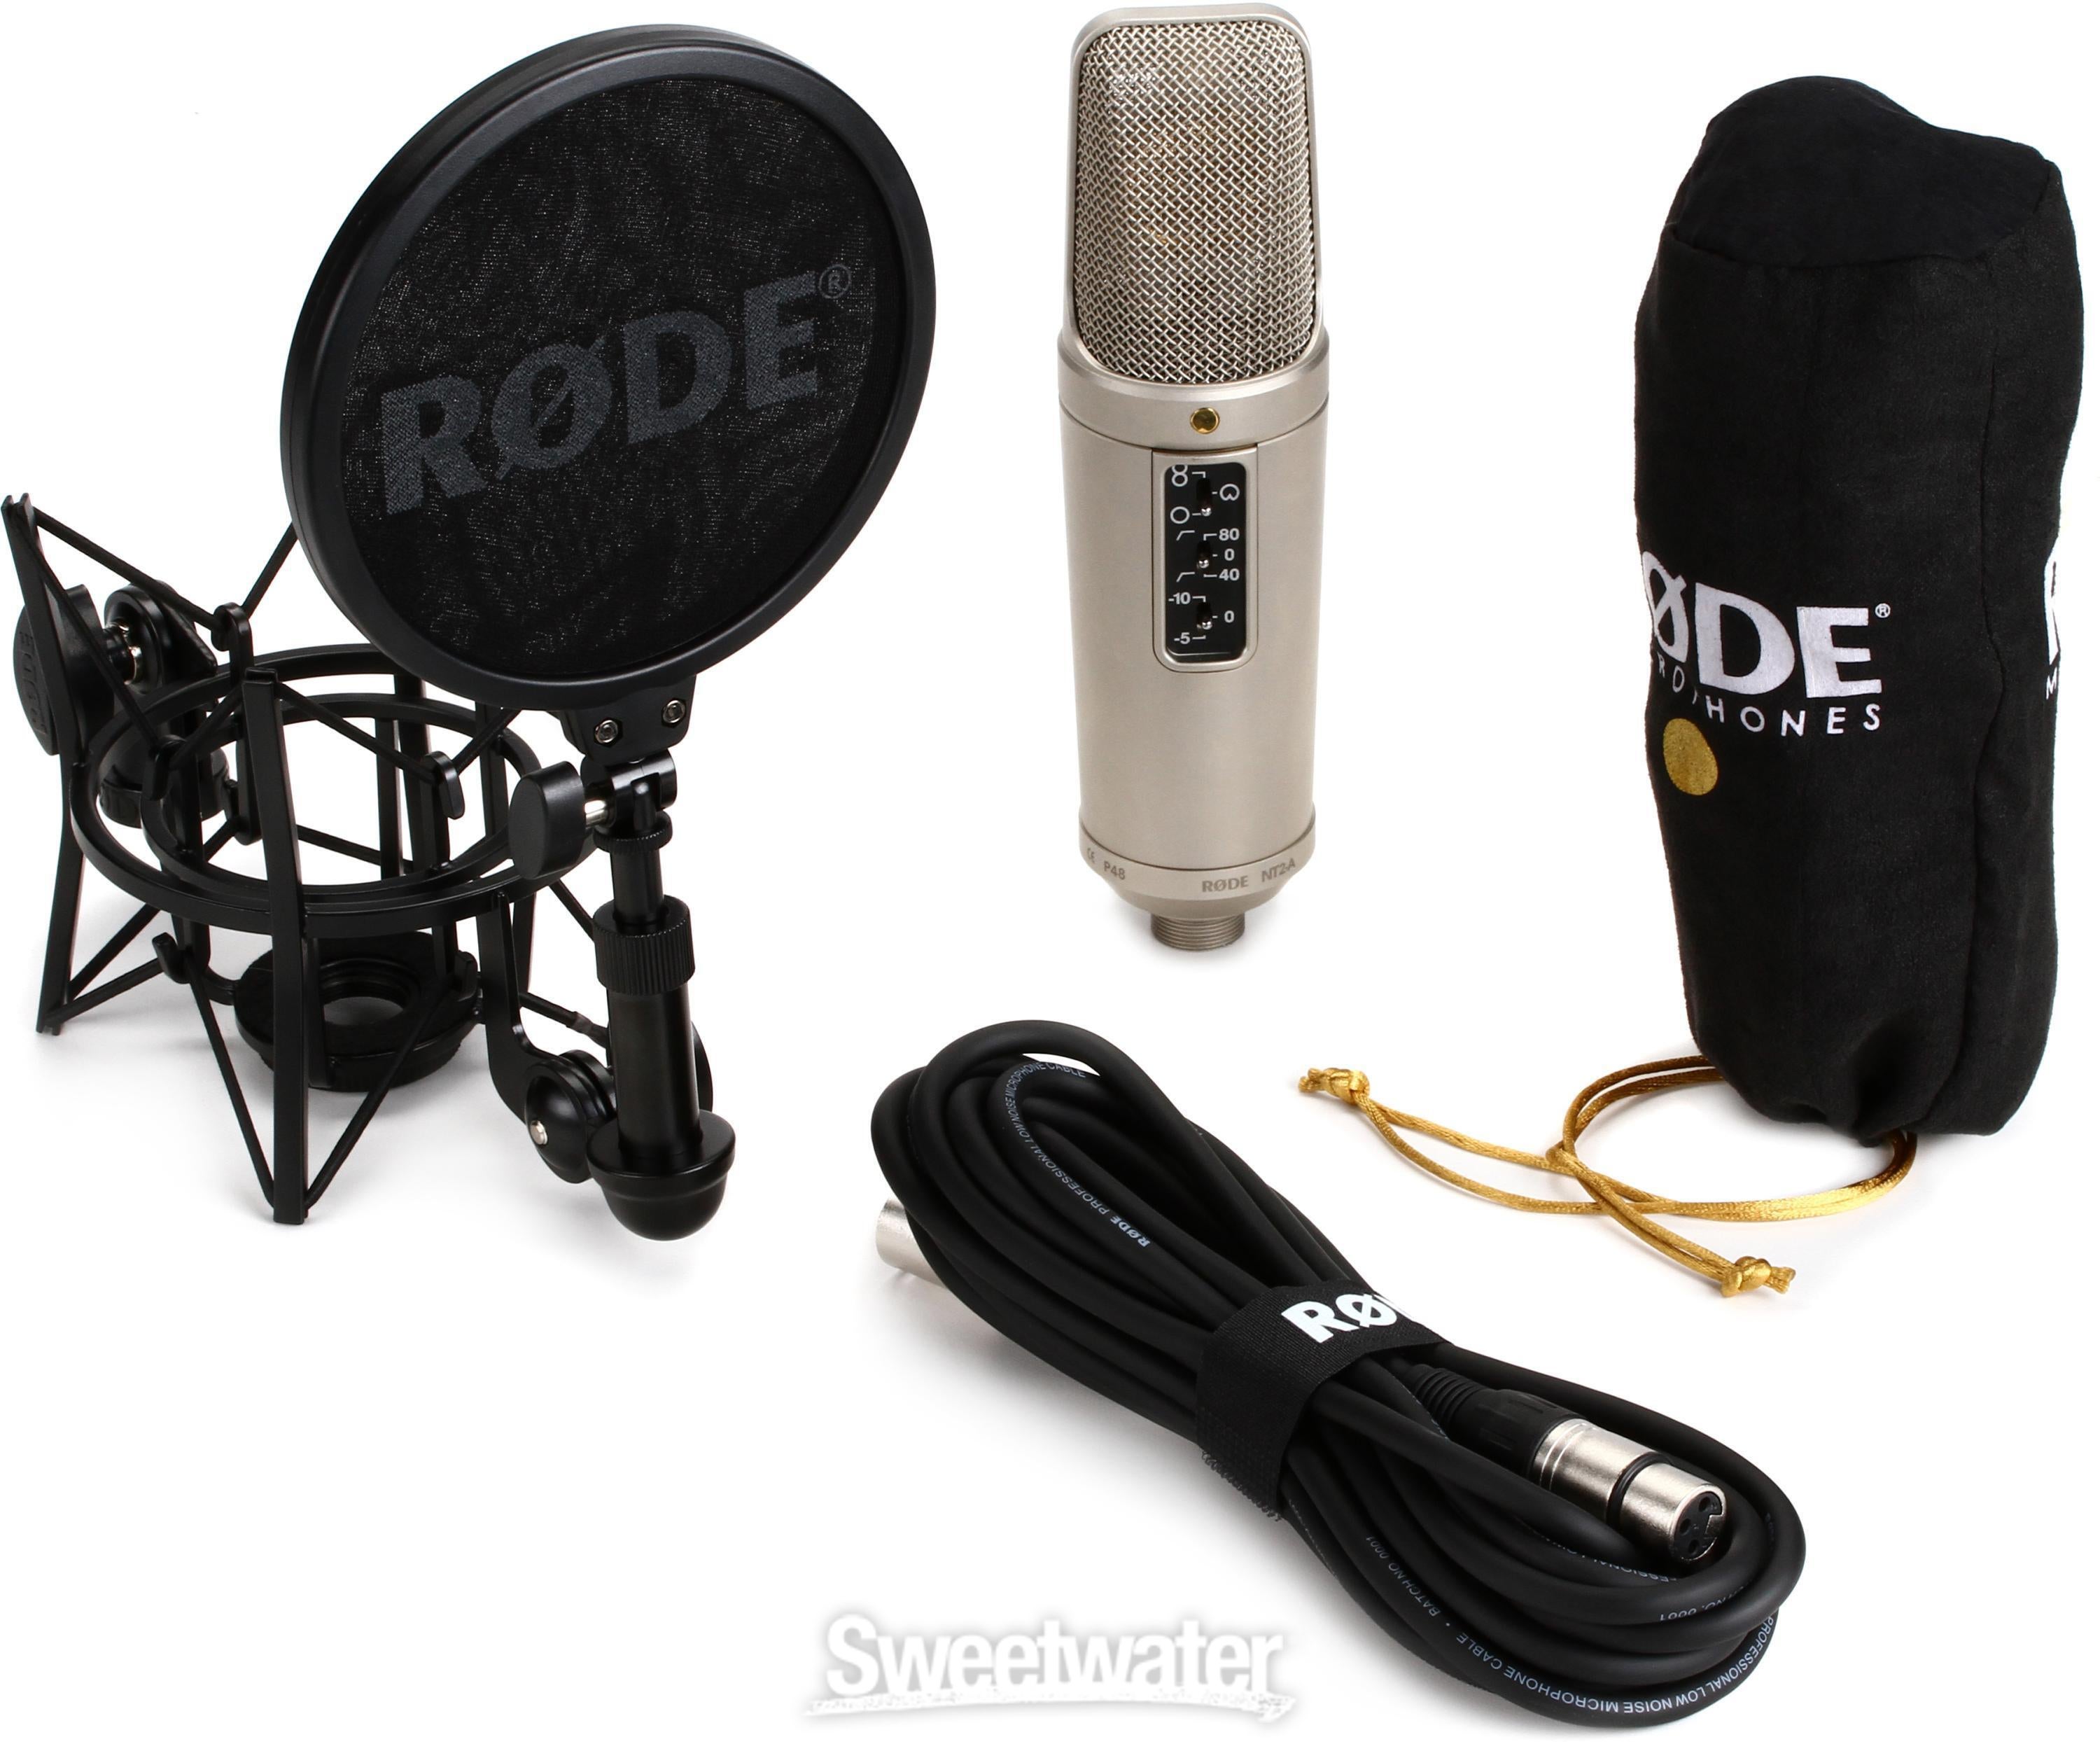 Rode　Microphone　Condenser　NT2-A　Large-diaphragm　Sweetwater